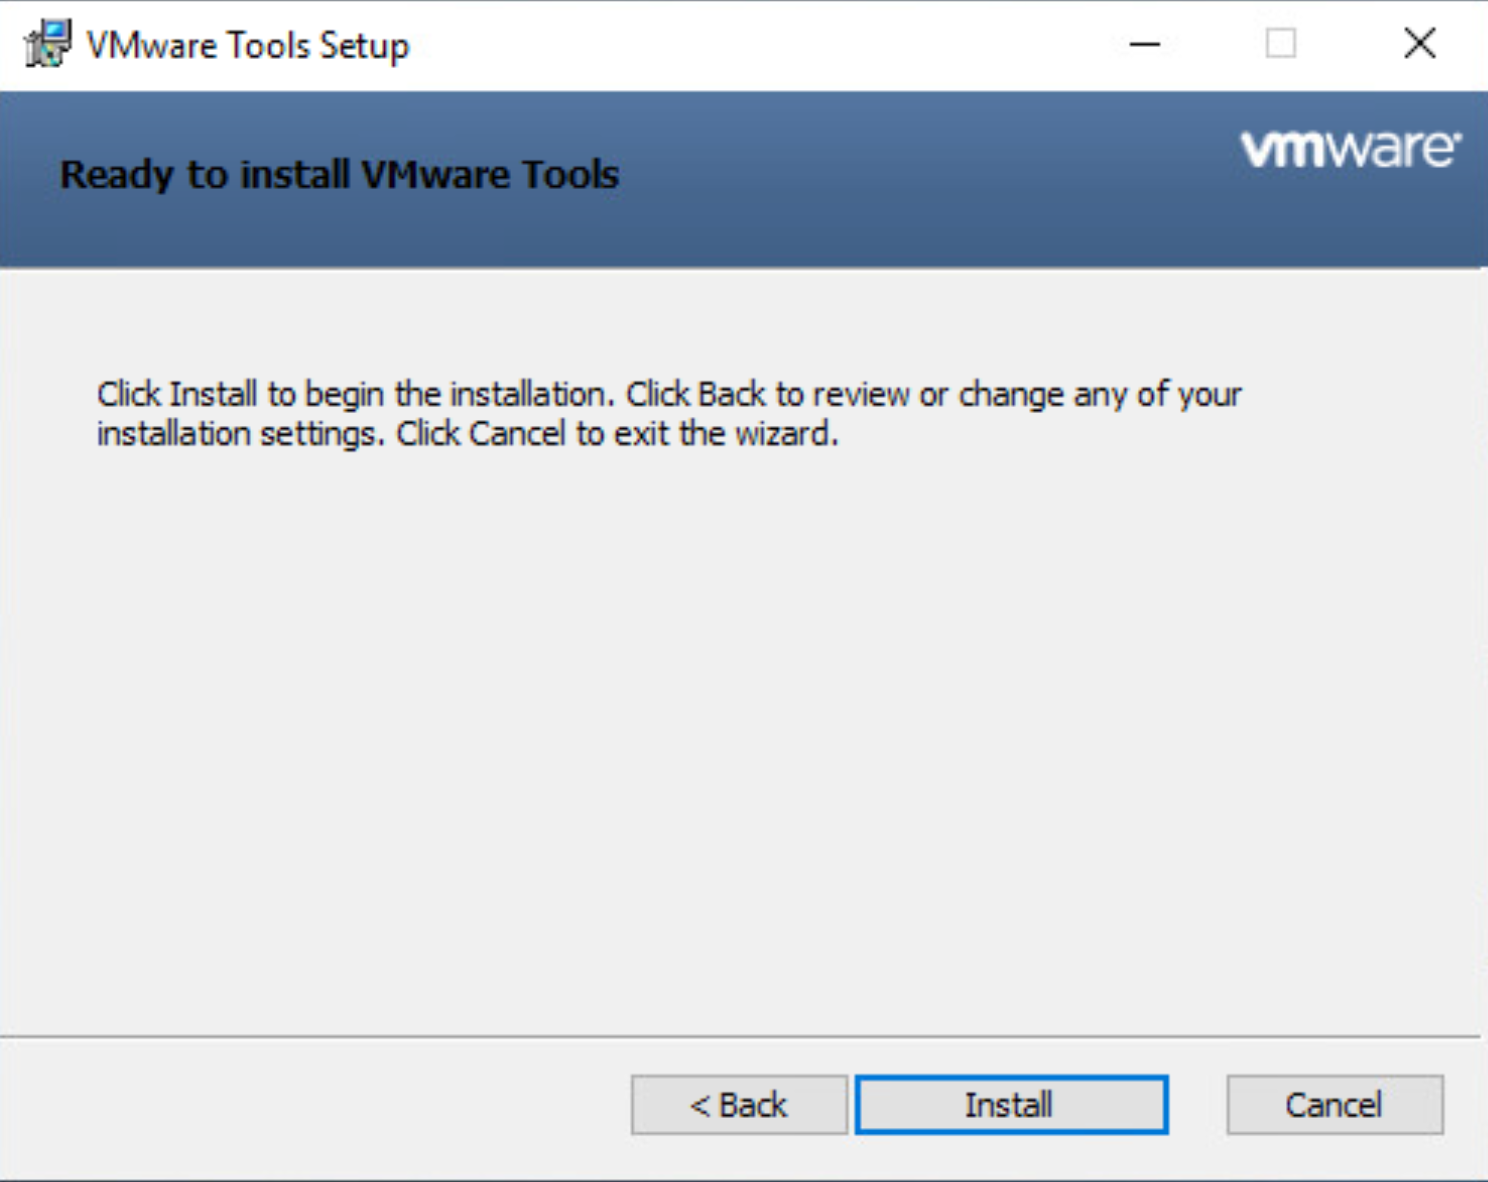 Screenshot of the VMware Tools Setup window saying it's ready to install.